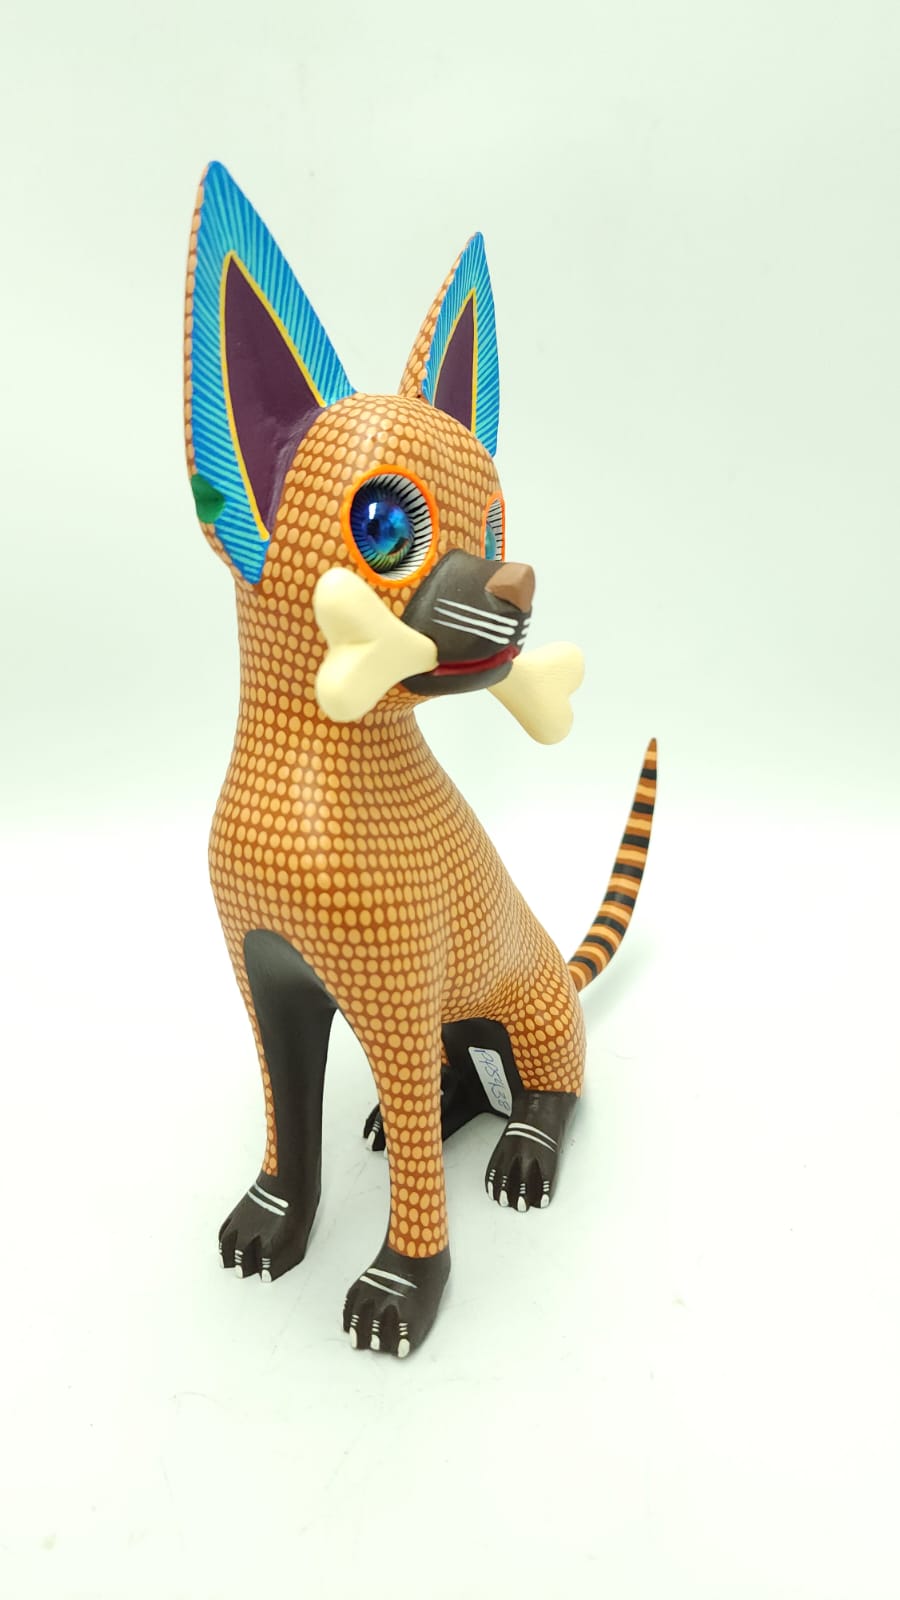 Great Mexican Oaxacan Wood Carving Alebrije Chihuahua By Isaac Fabian PP5438